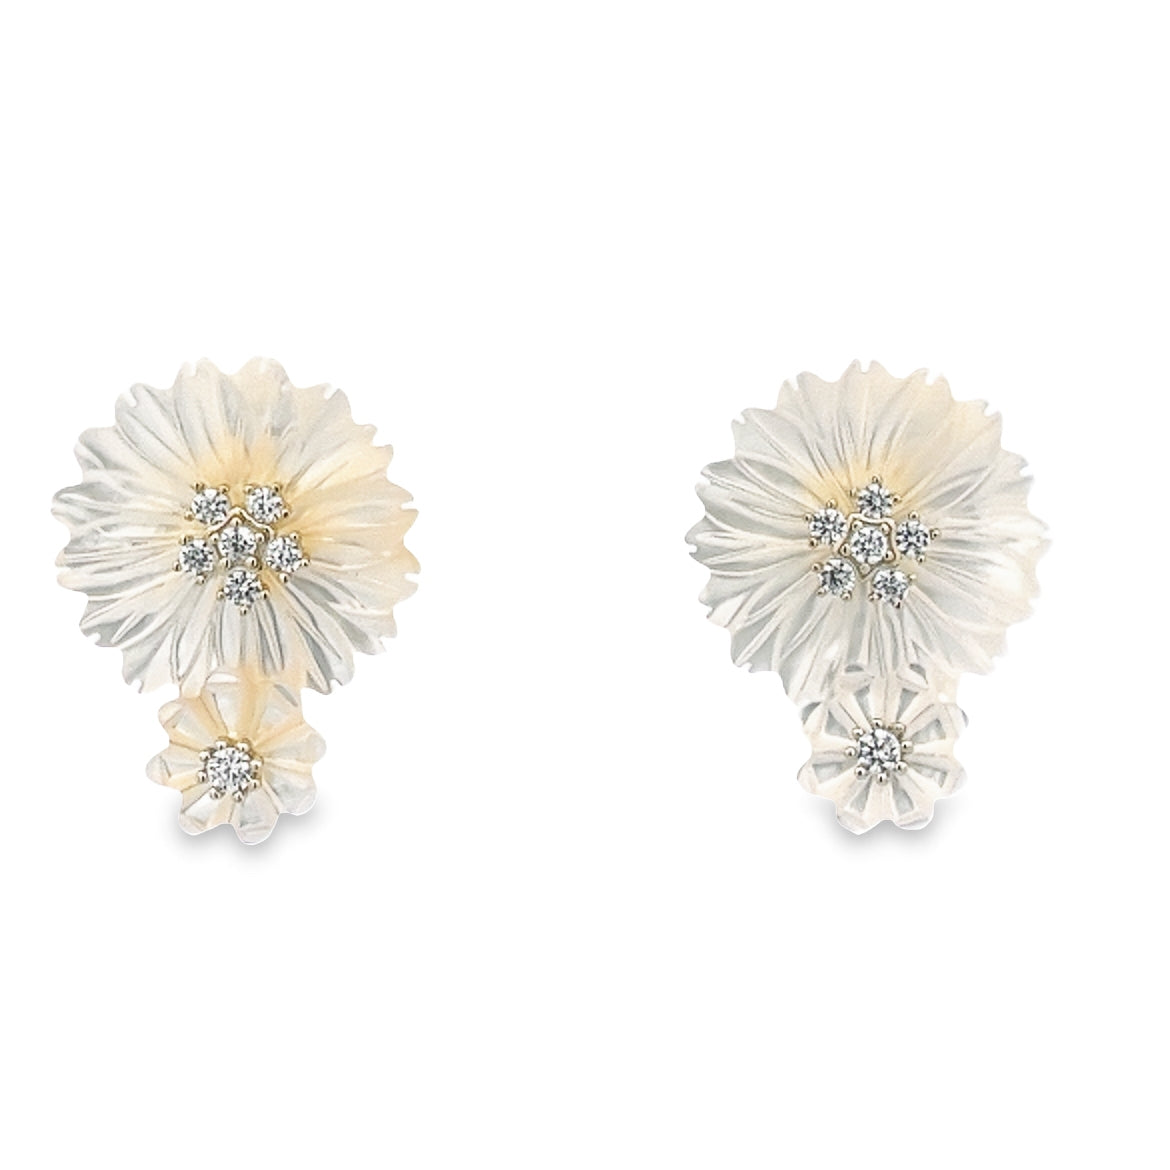 925 SILVER GOLD PLATED FLOWER EARRINGS WITH MOTHER OF PEARL